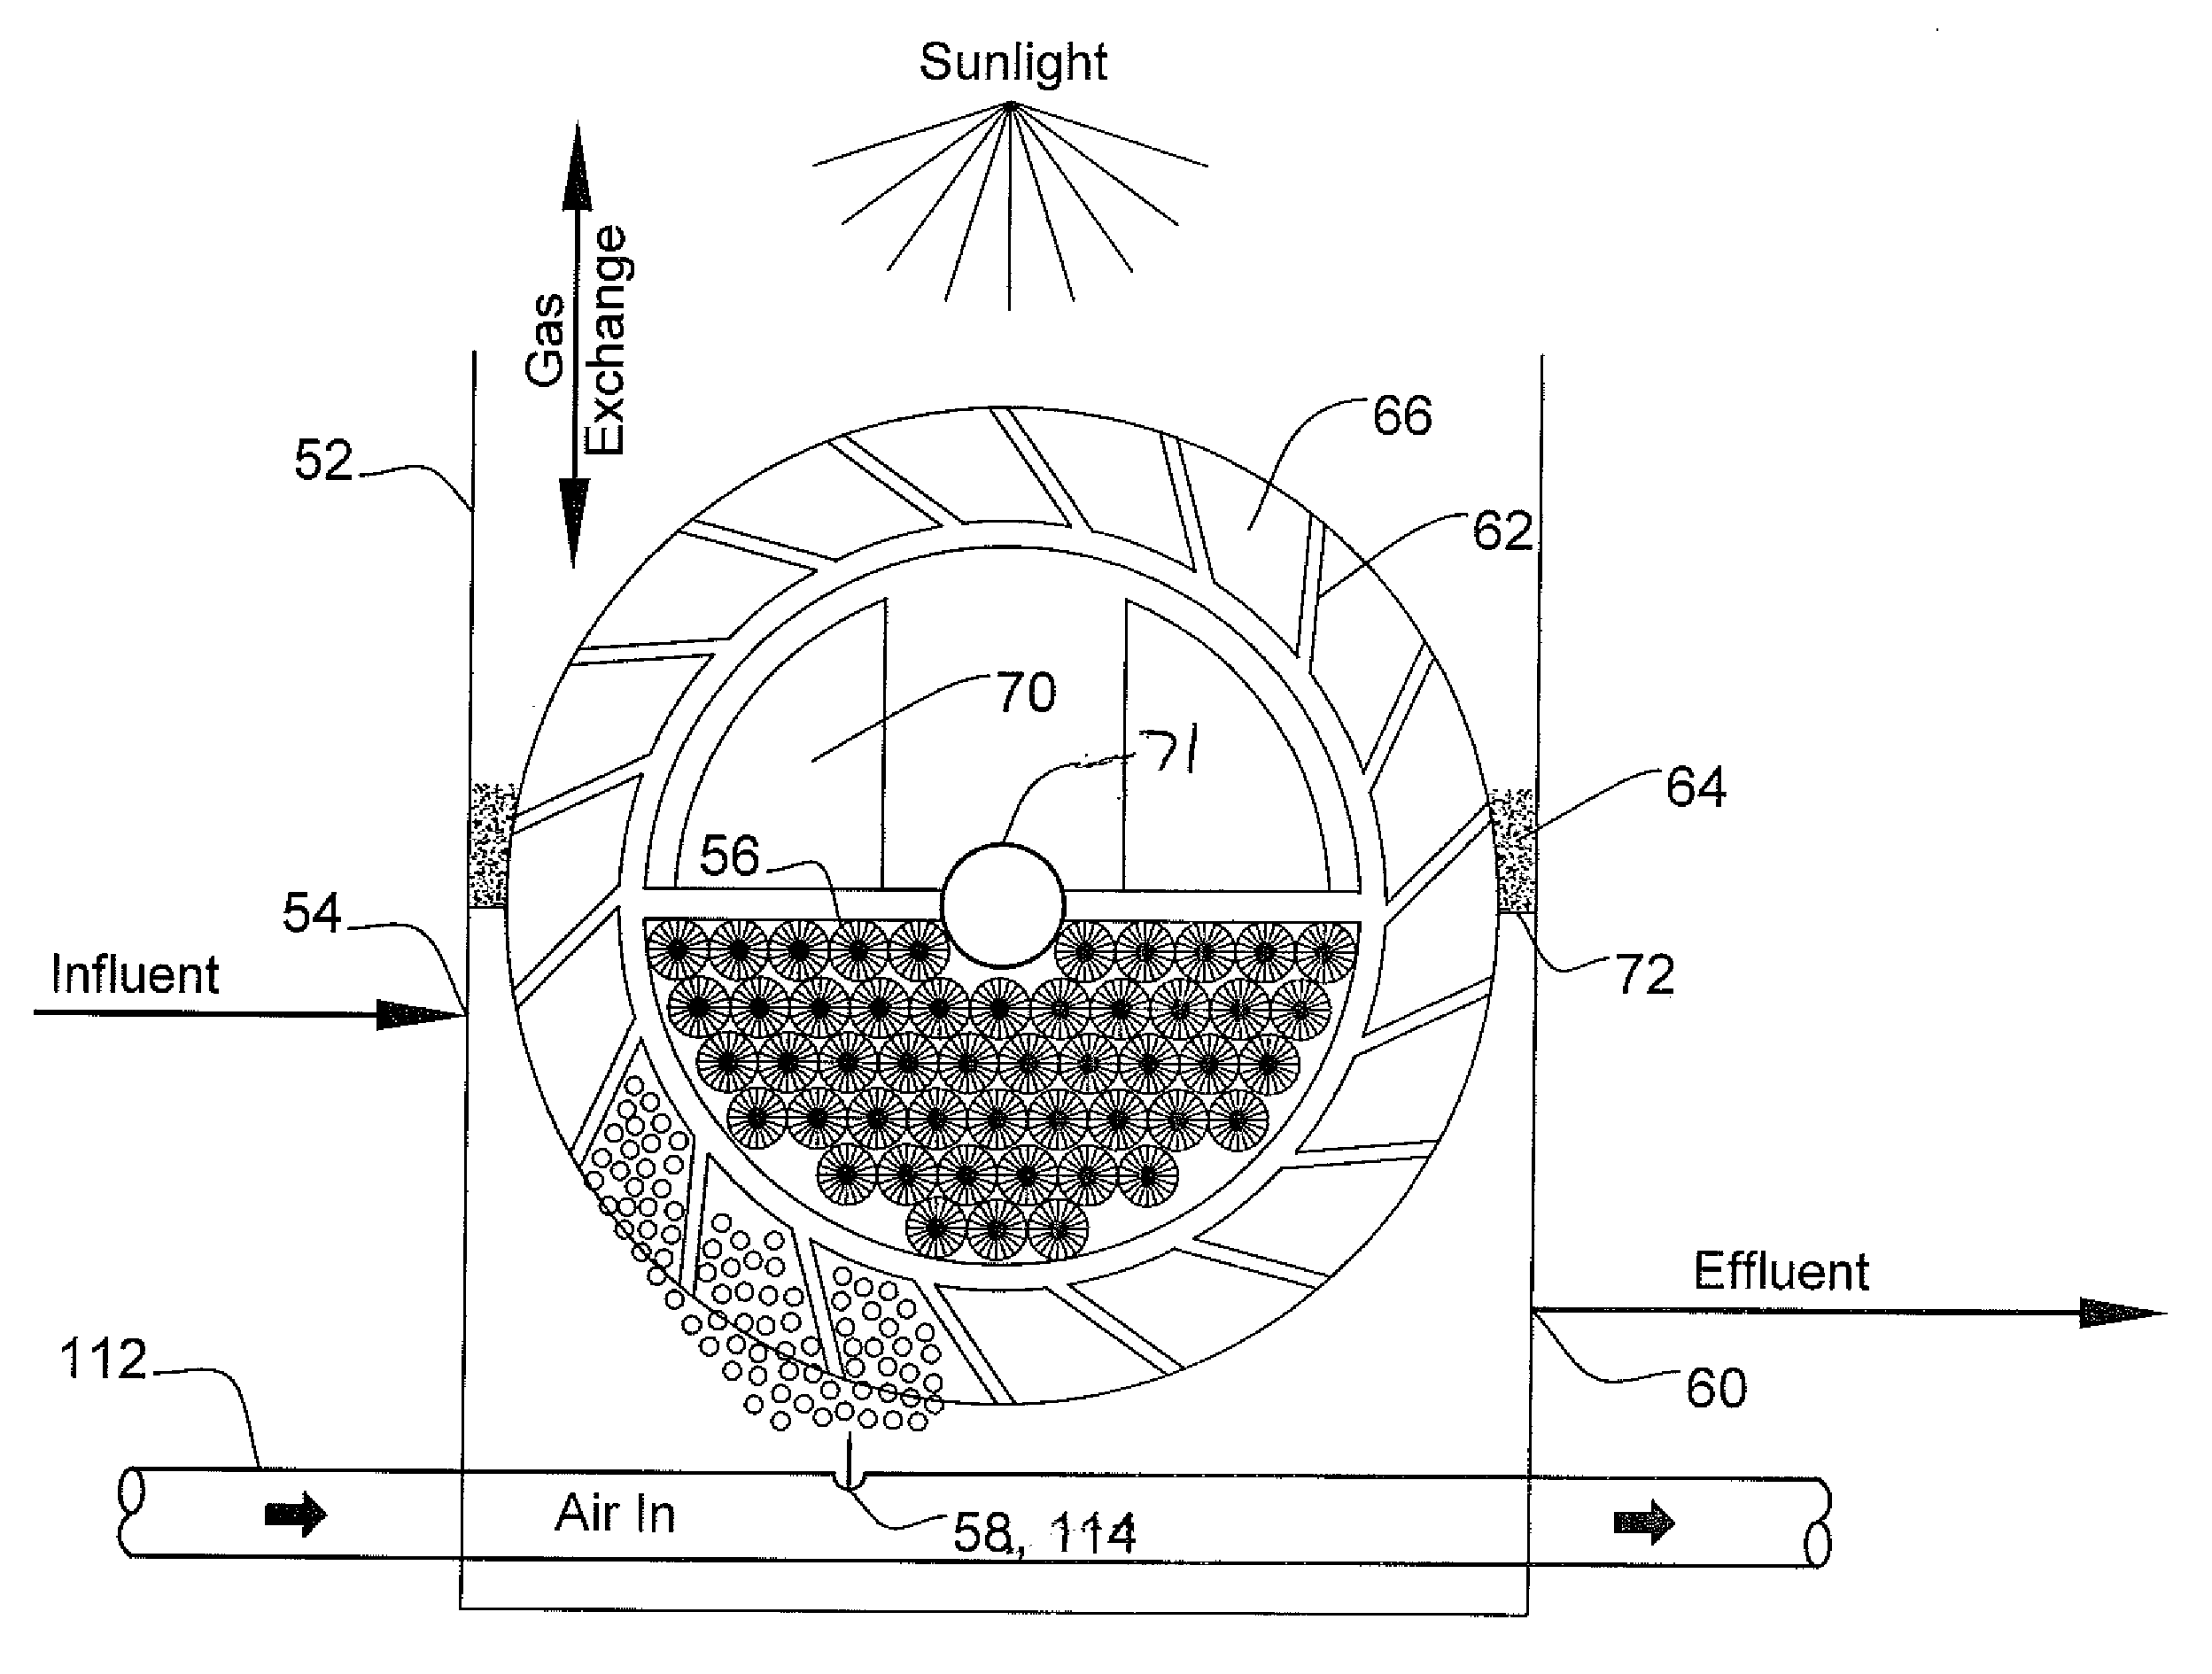 Apparatus and Process for Biological Wastewater Treatment